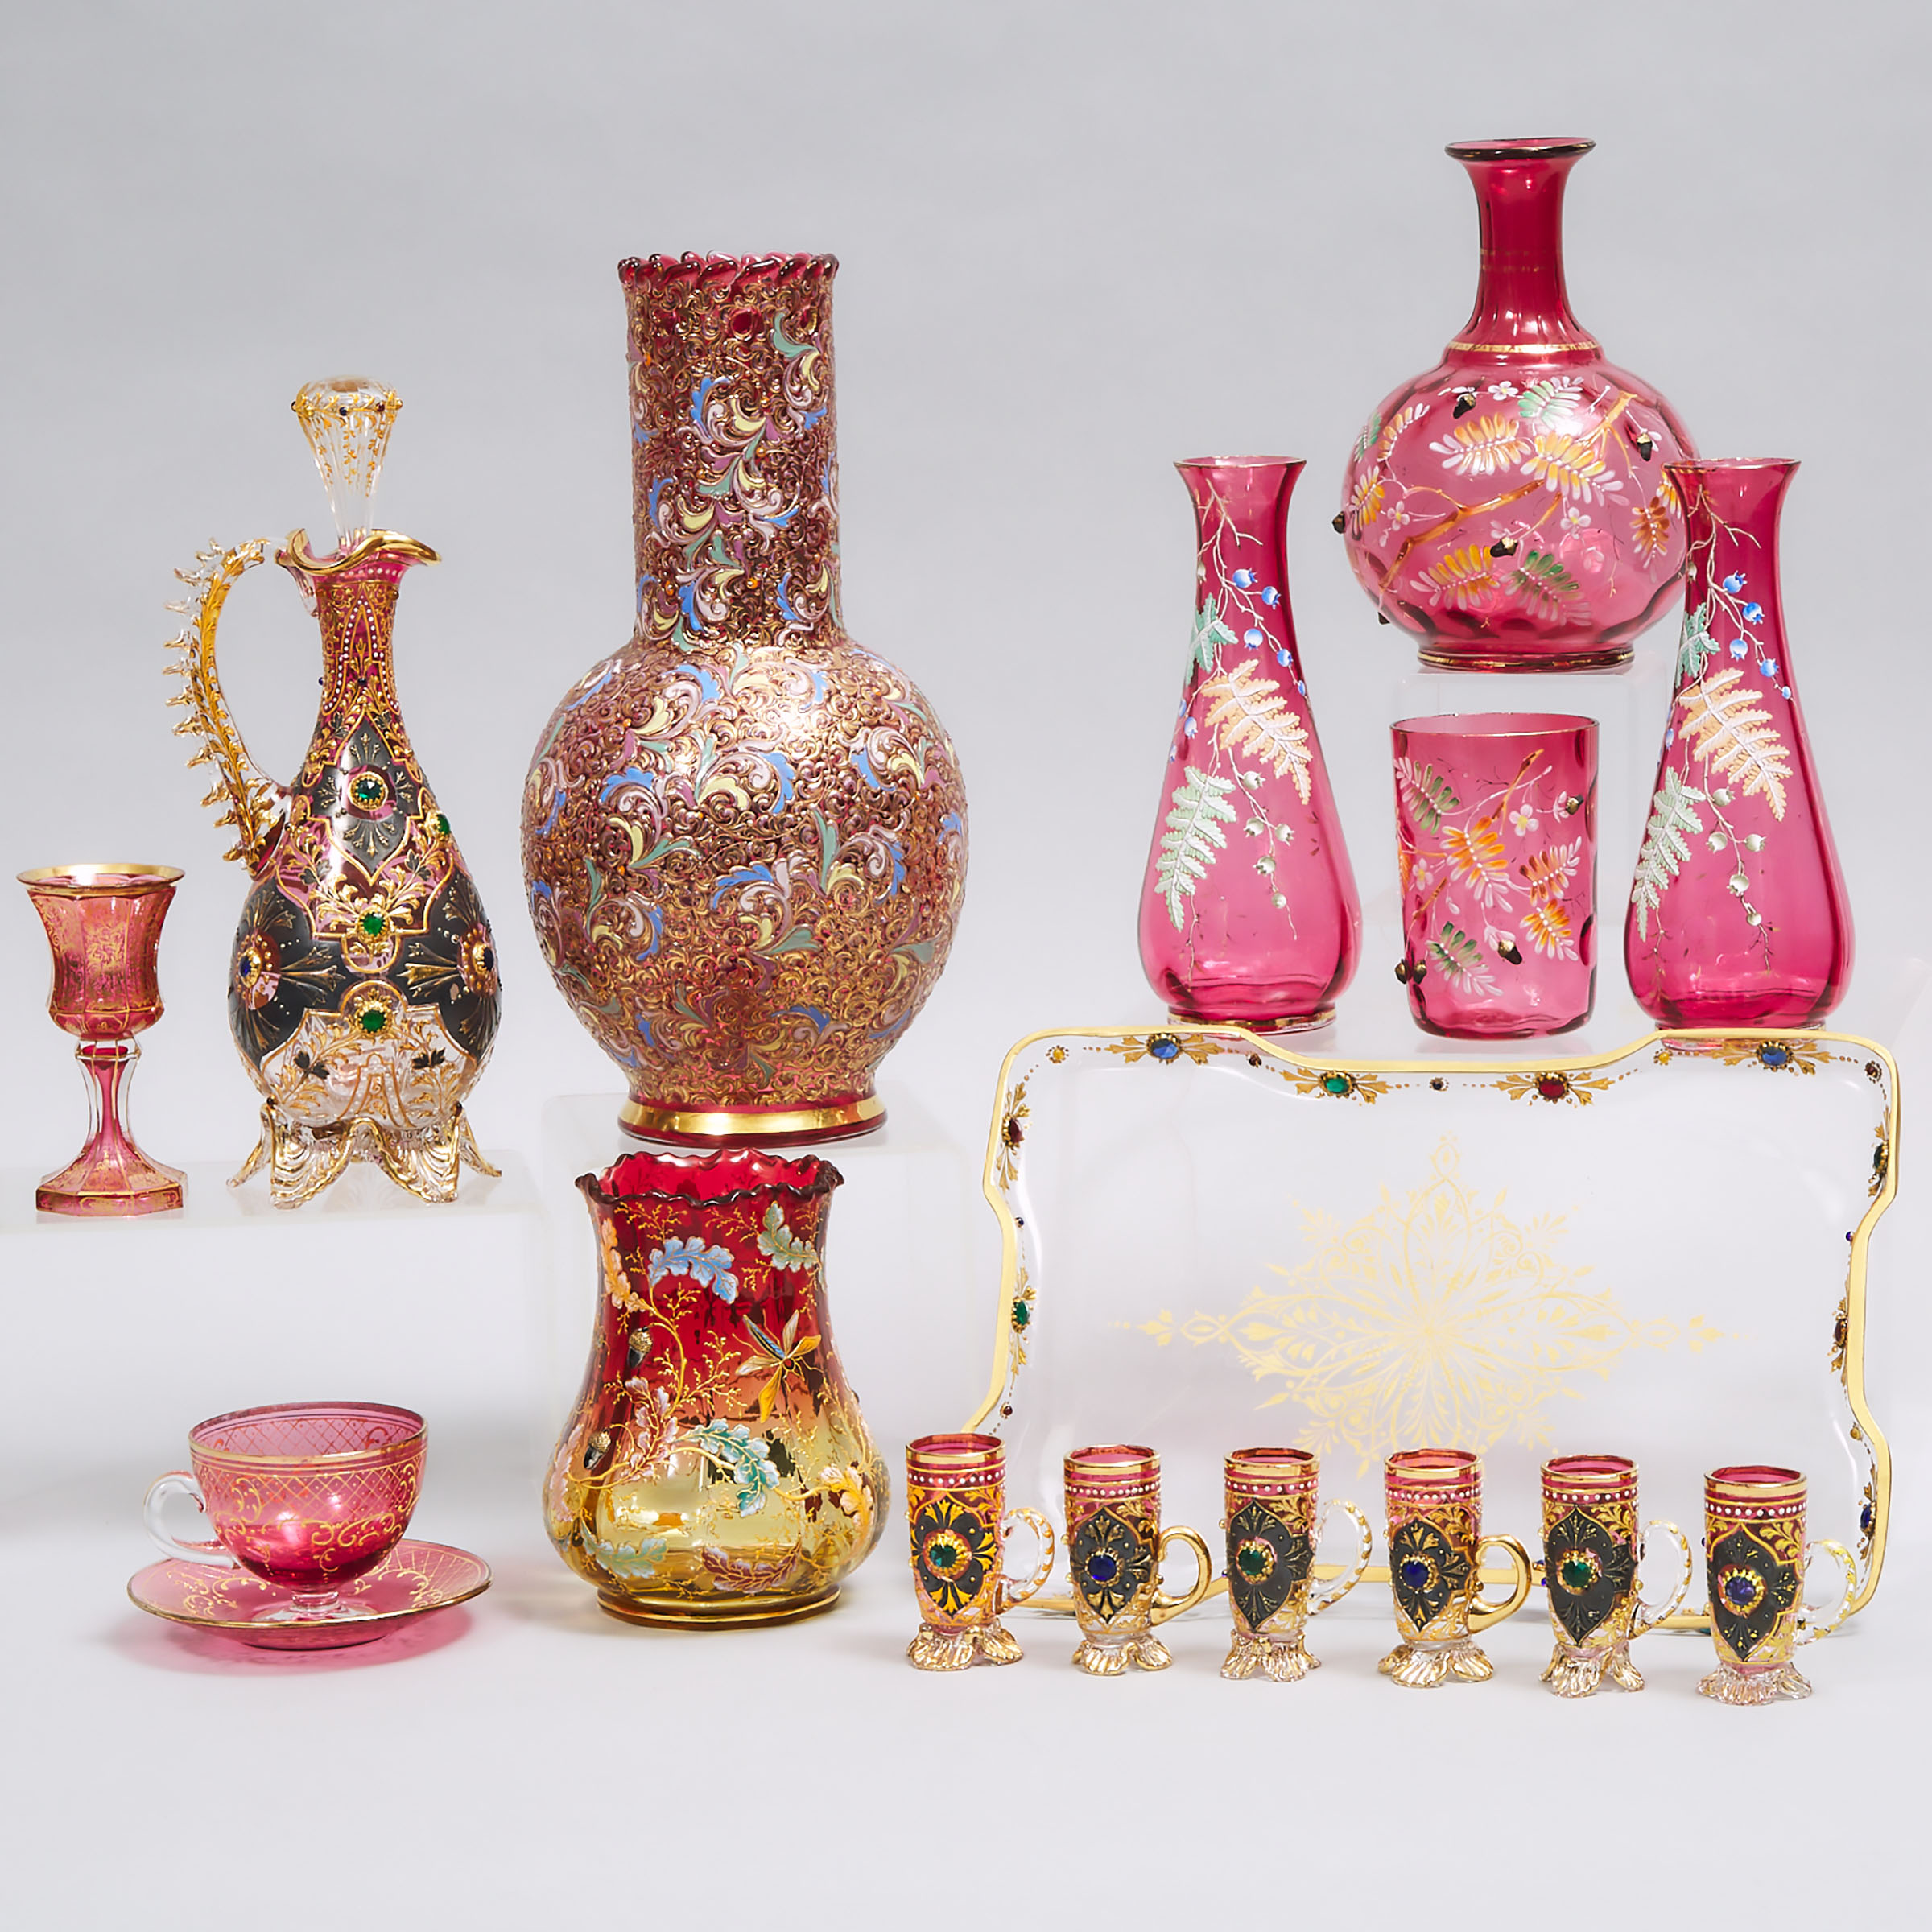 Group of Bohemian Enameled and Gilt Red Glass, late 19th century